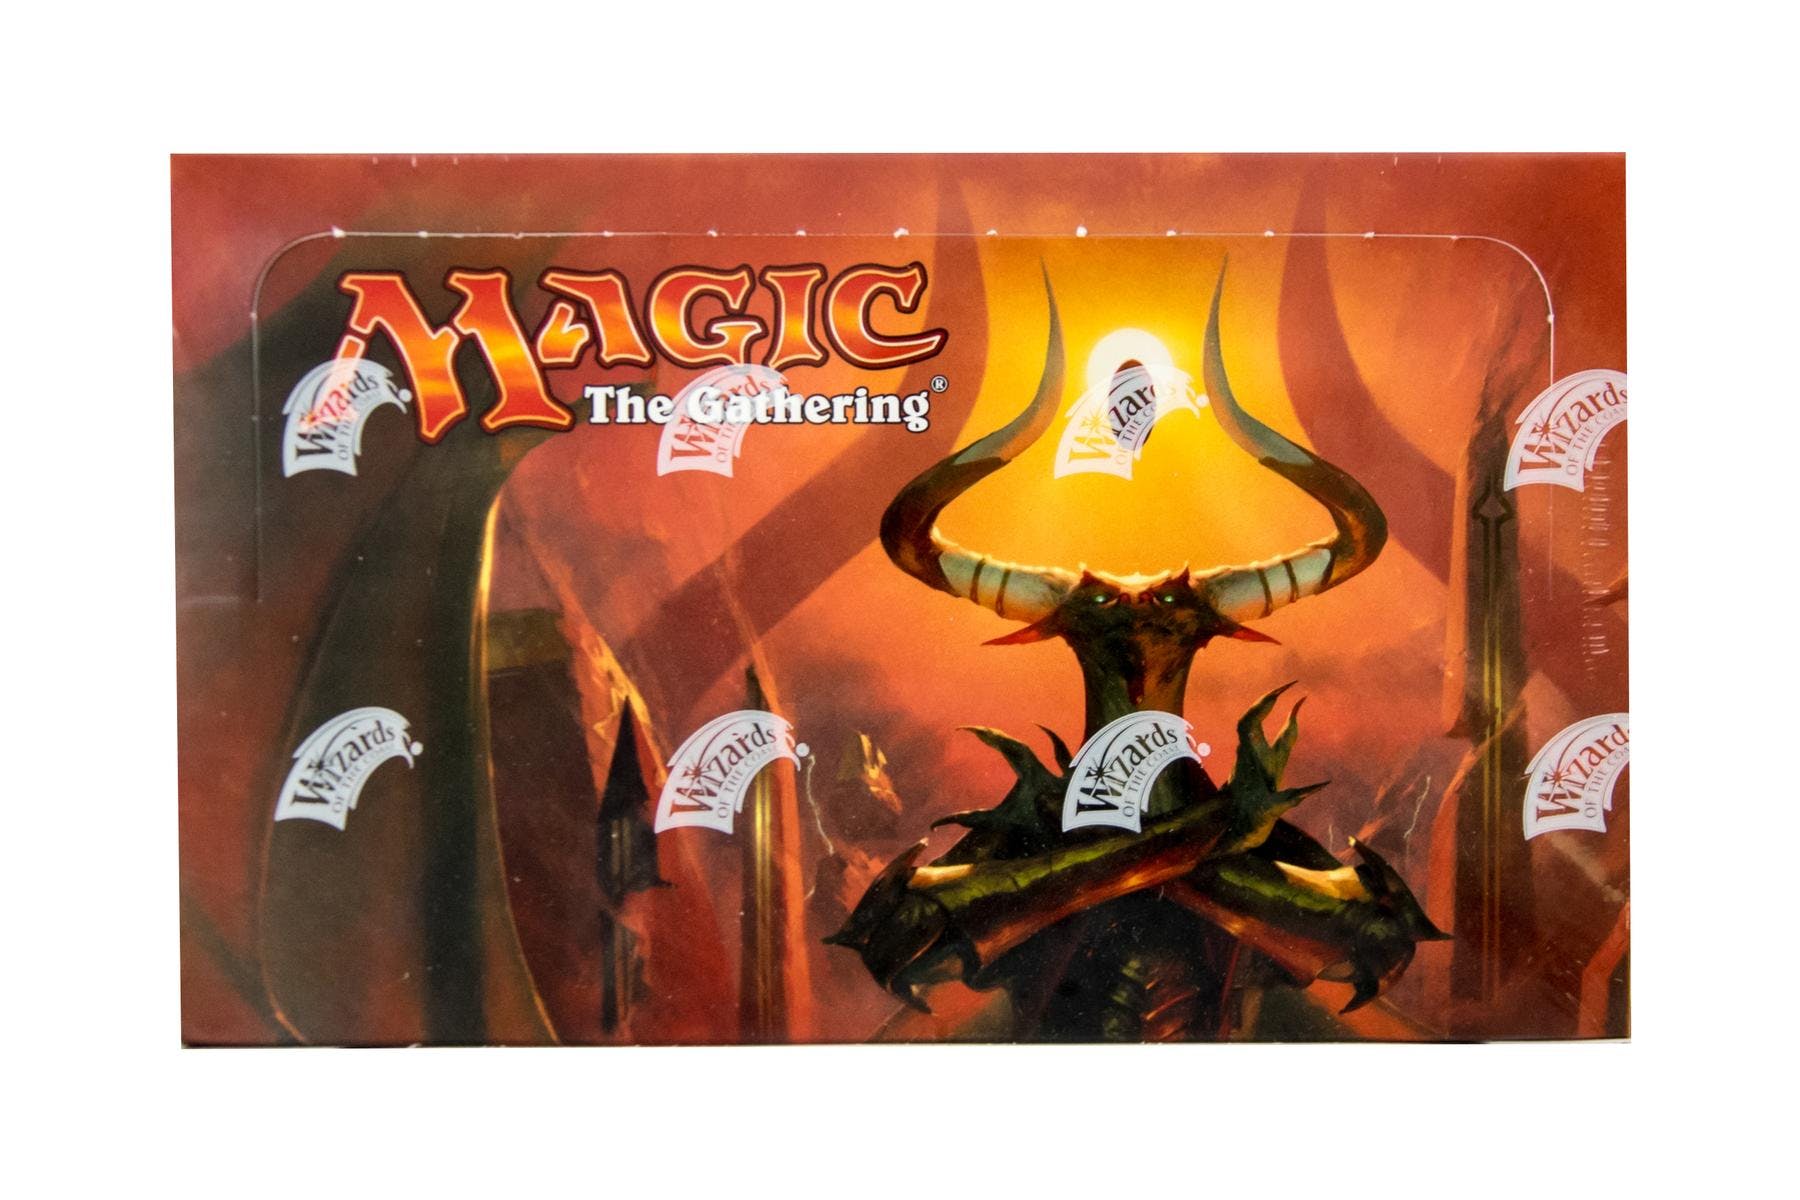 Magic The Gathering Hour Of Devastation Booster Box - BigBoi Cards